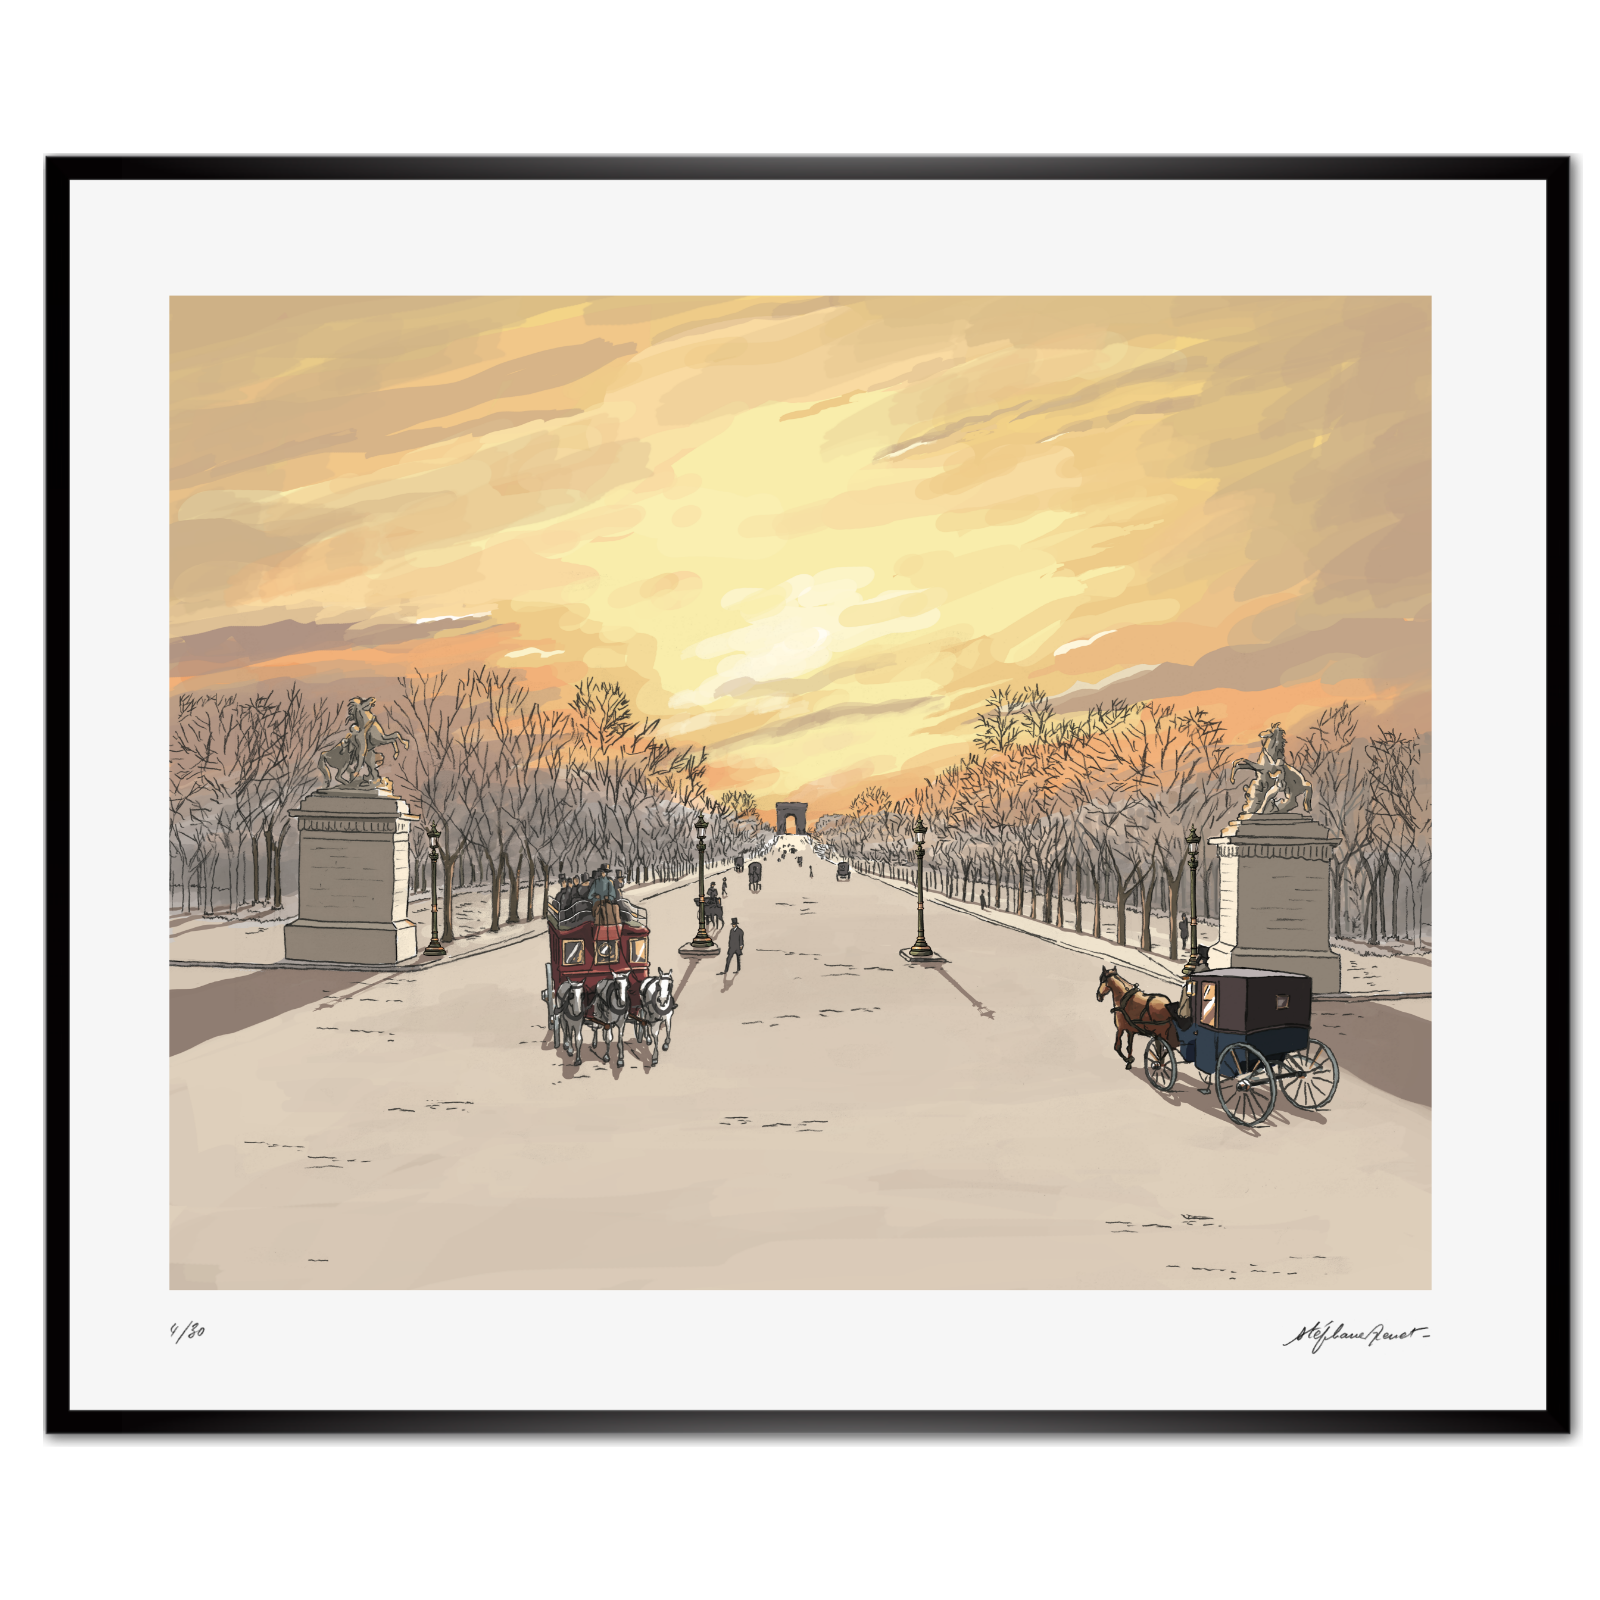 The narrator’s carriage on the Champs Elysées at sunset